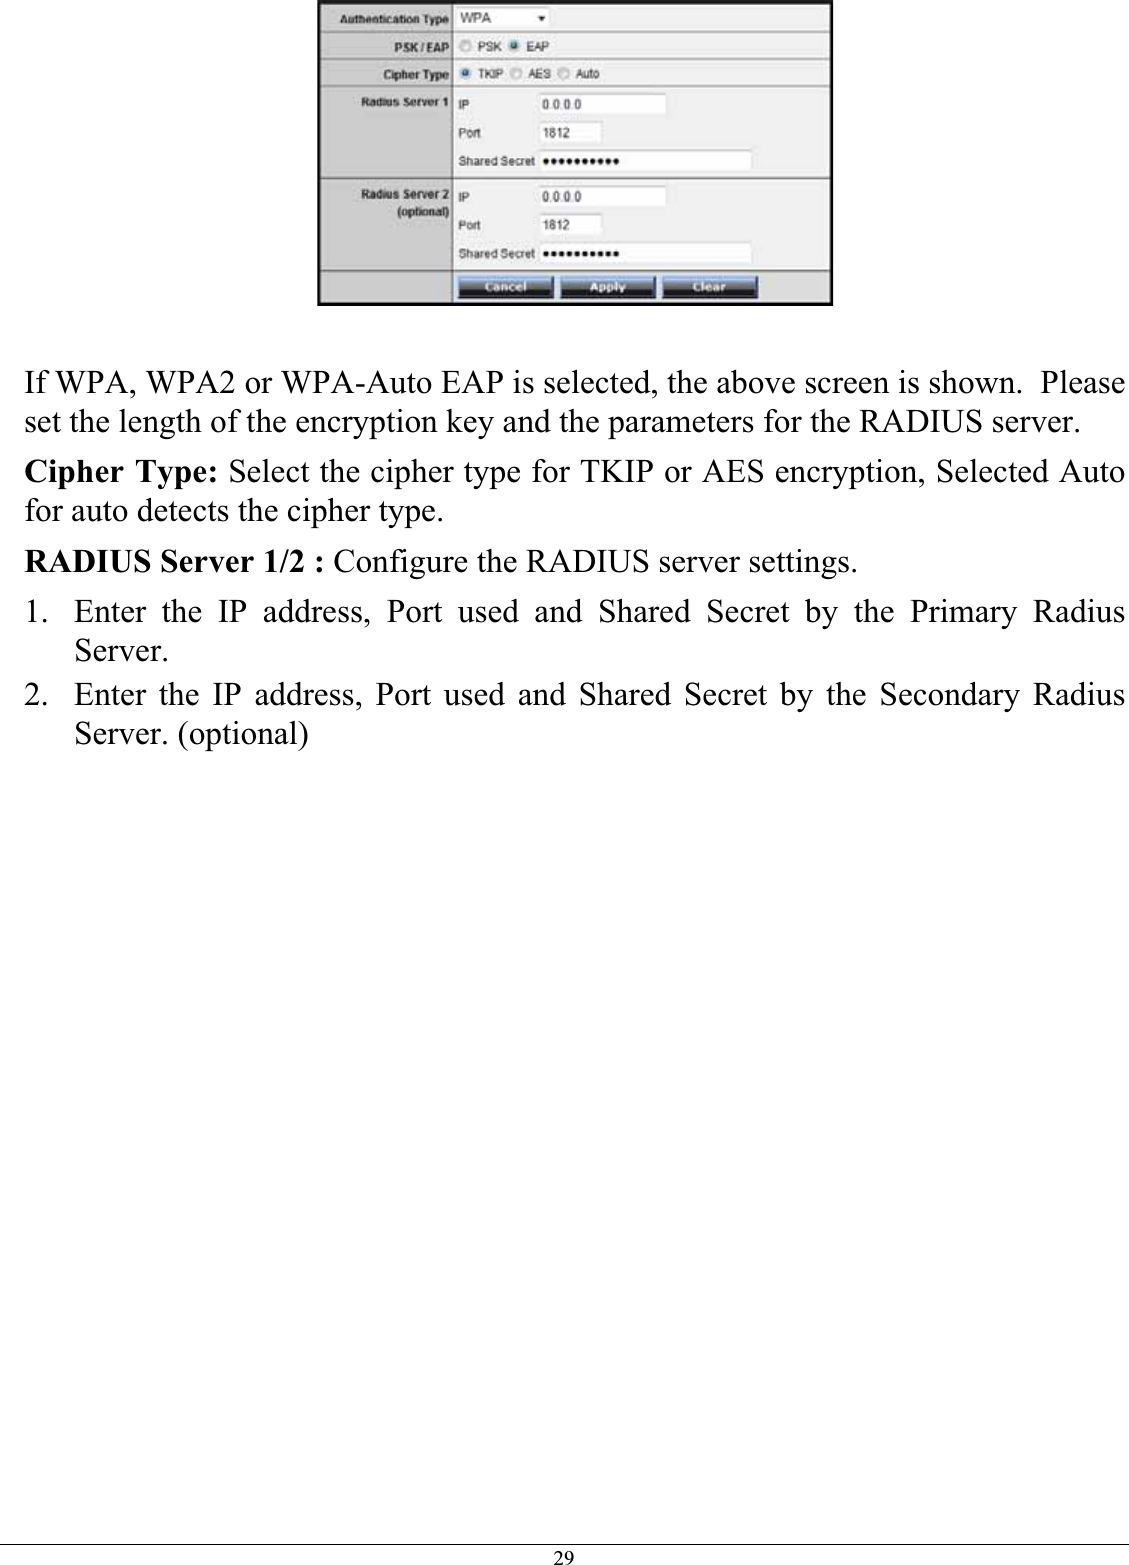 29If WPA, WPA2 or WPA-Auto EAP is selected, the above screen is shown.  Please set the length of the encryption key and the parameters for the RADIUS server. Cipher Type: Select the cipher type for TKIP or AES encryption, Selected Auto for auto detects the cipher type.RADIUS Server 1/2 : Configure the RADIUS server settings. 1. Enter the IP address, Port used and Shared Secret by the Primary Radius Server.2. Enter the IP address, Port used and Shared Secret by the Secondary Radius Server. (optional) 